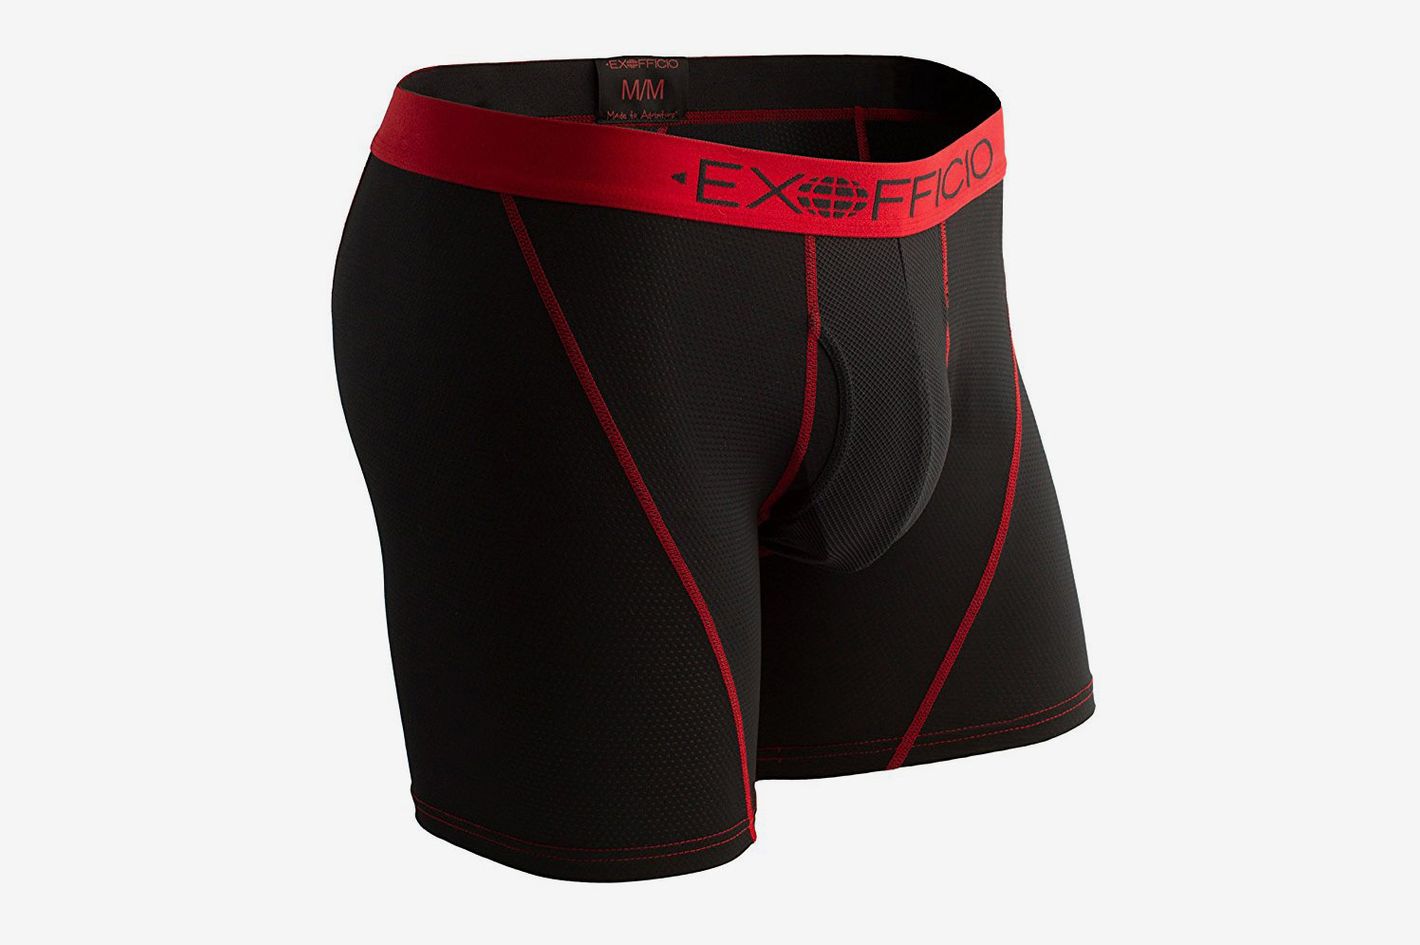 The Best Men's Sports Underwear for Working Out and Staying Comfortable